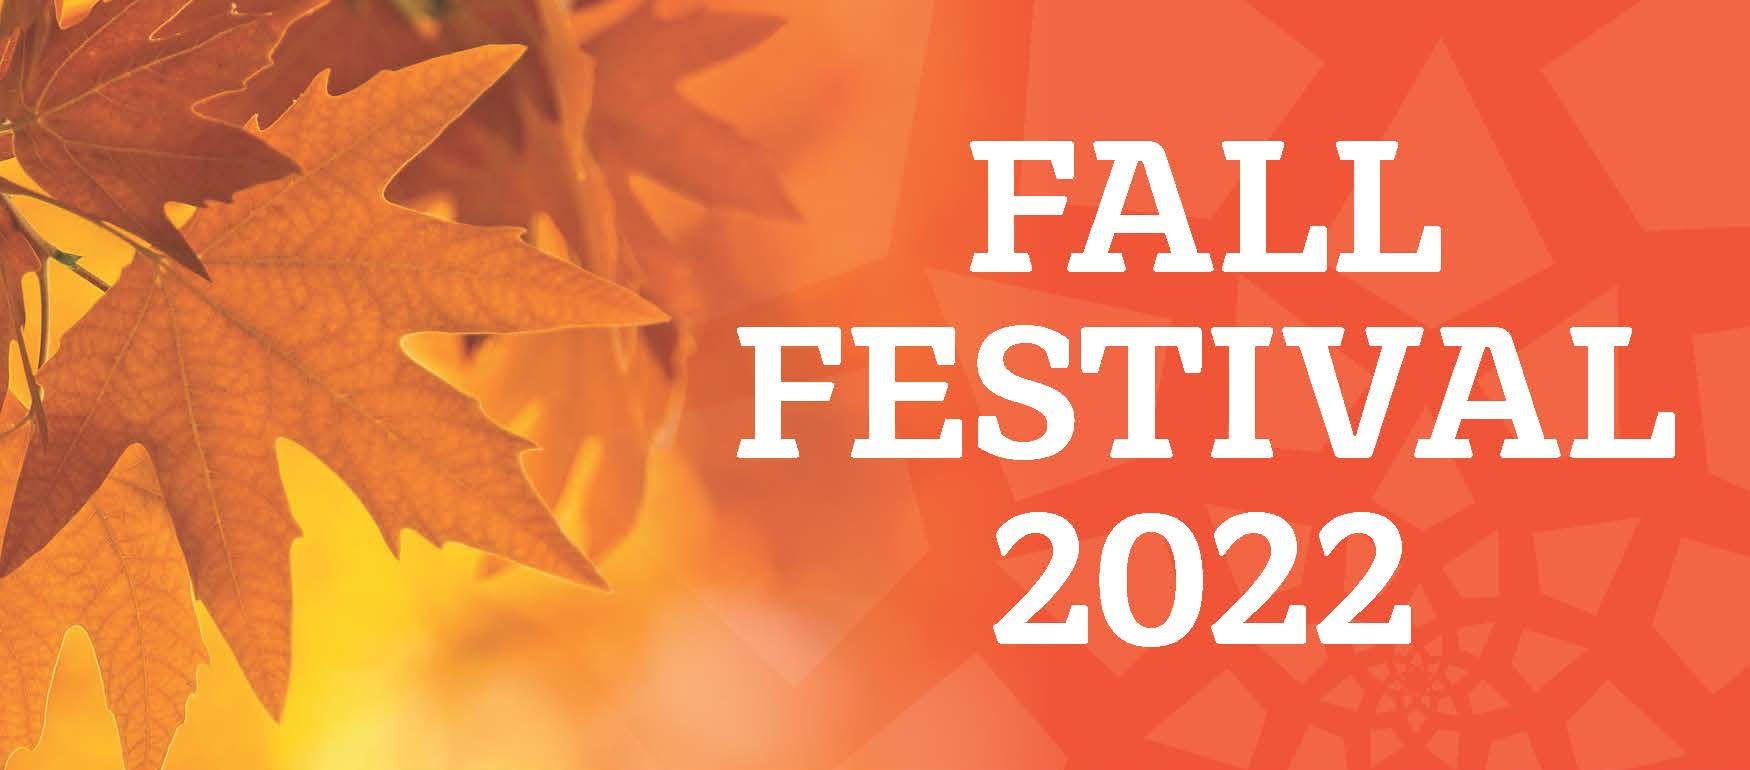 UPDATED: COA fall festival at Elizabeth City campus moved to Oct. 20